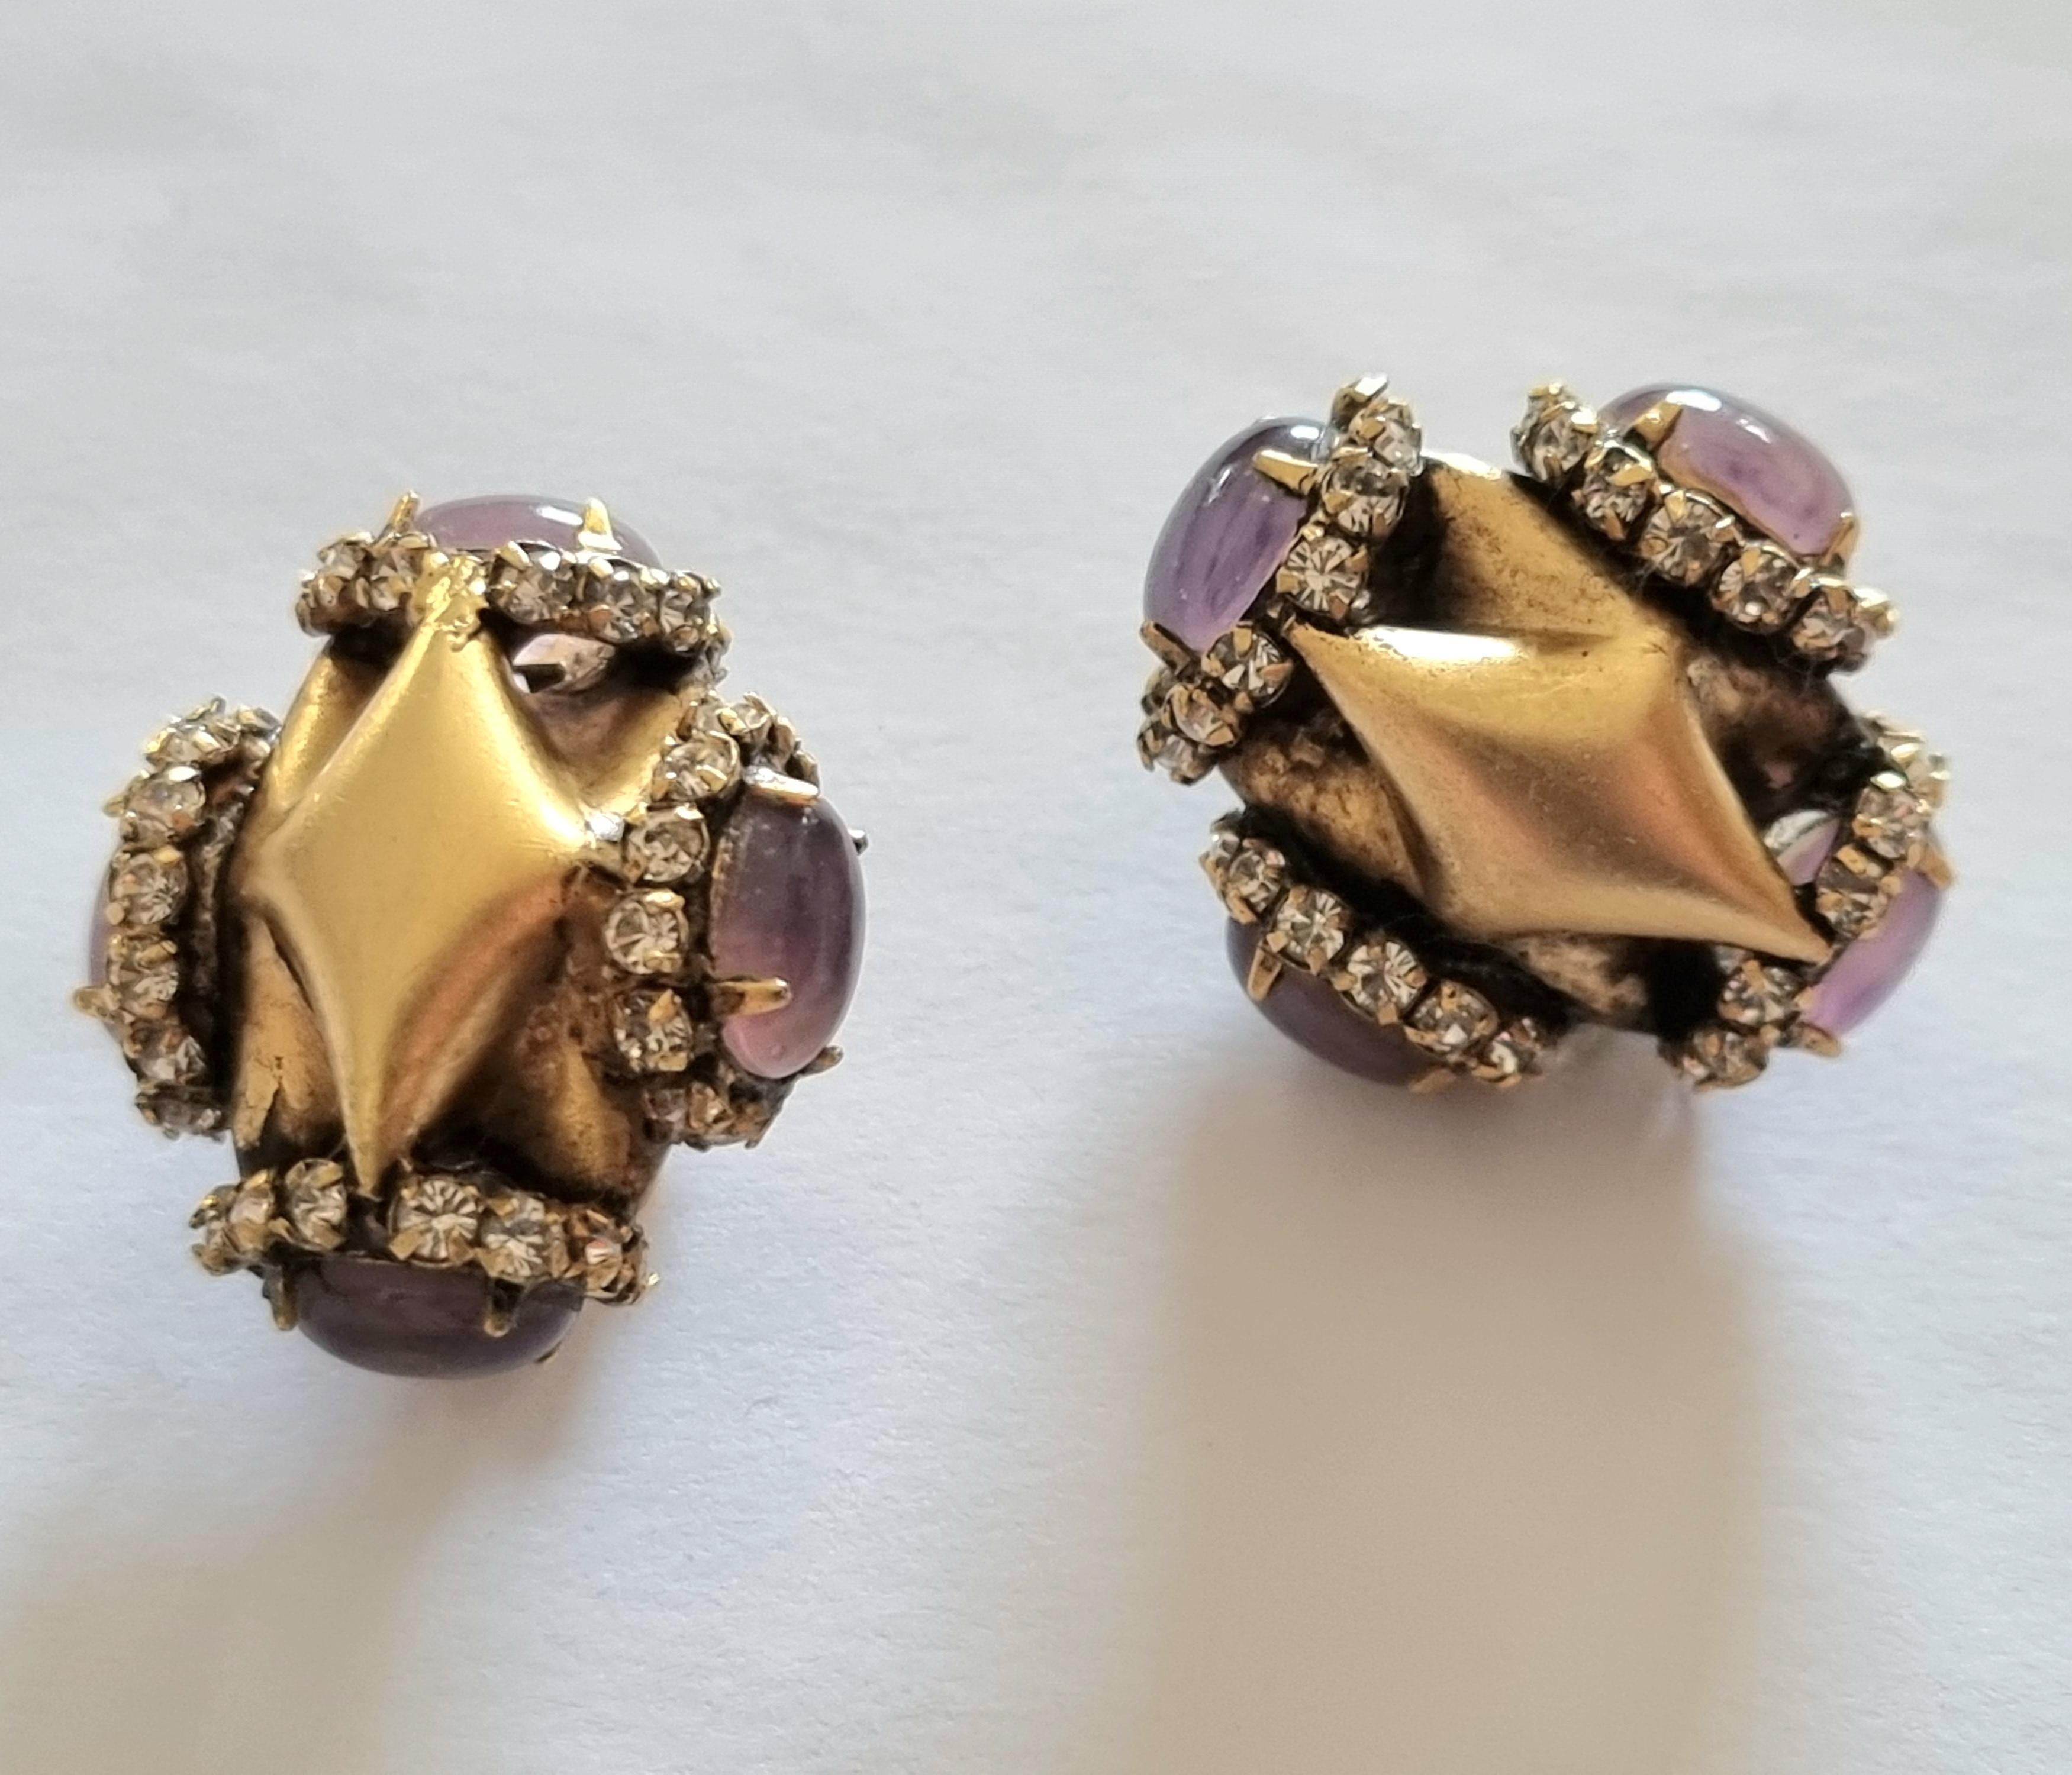 Iradj Moini, Clip-on EARRINGS, vintage, glass cabochons, rhinestones For Sale 1